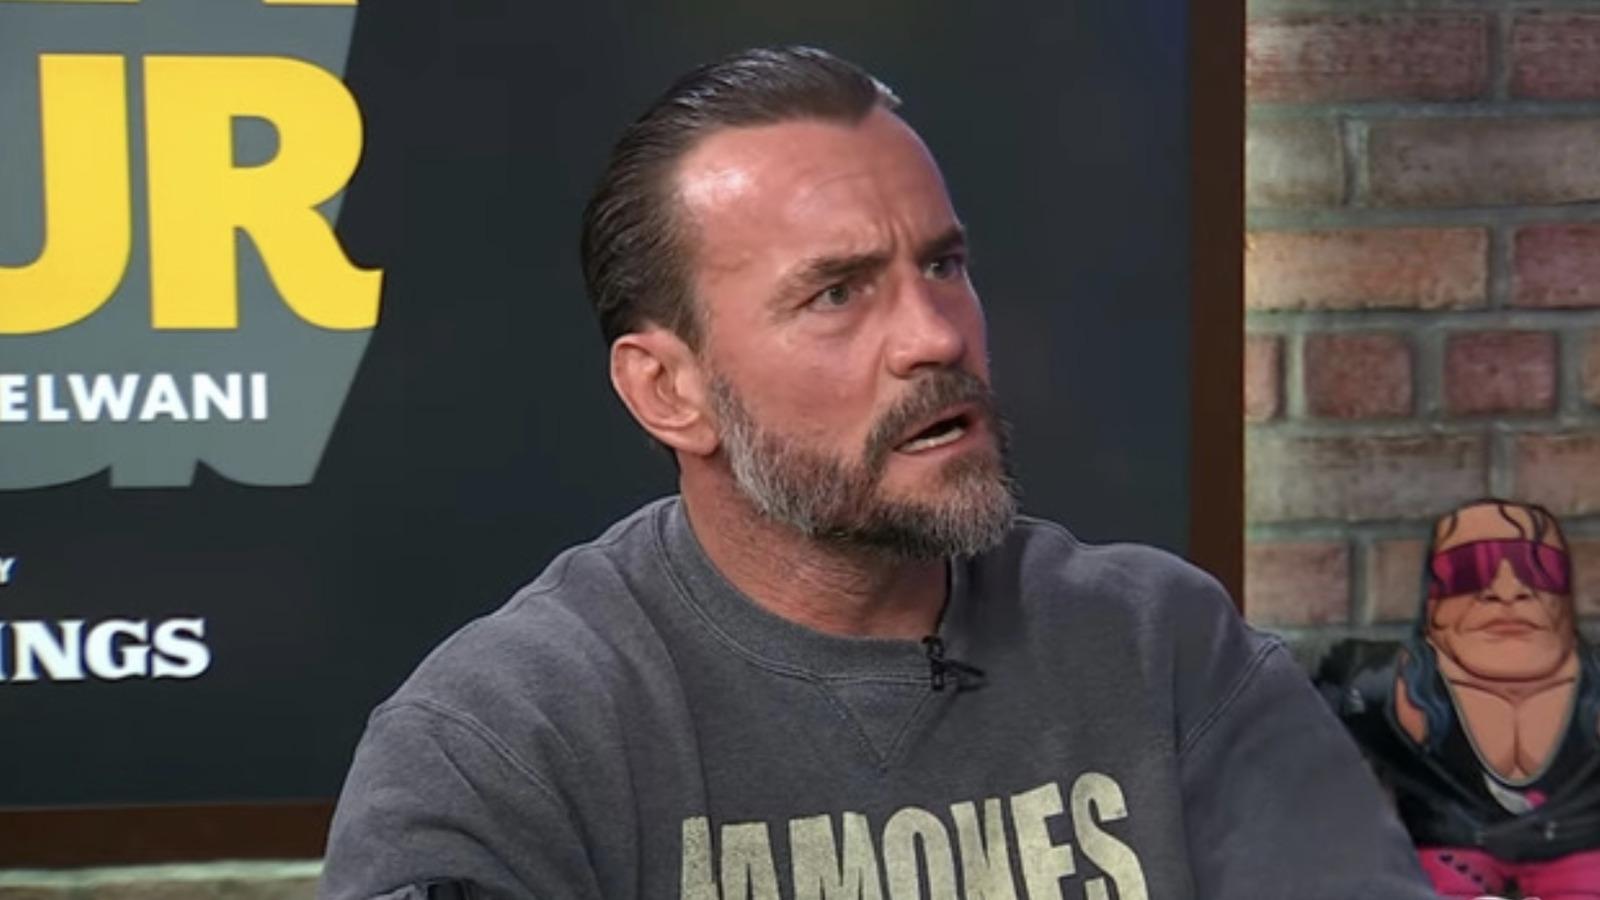 Current WWE star CM Punk rips into AEW and its founder, Tony Khan.